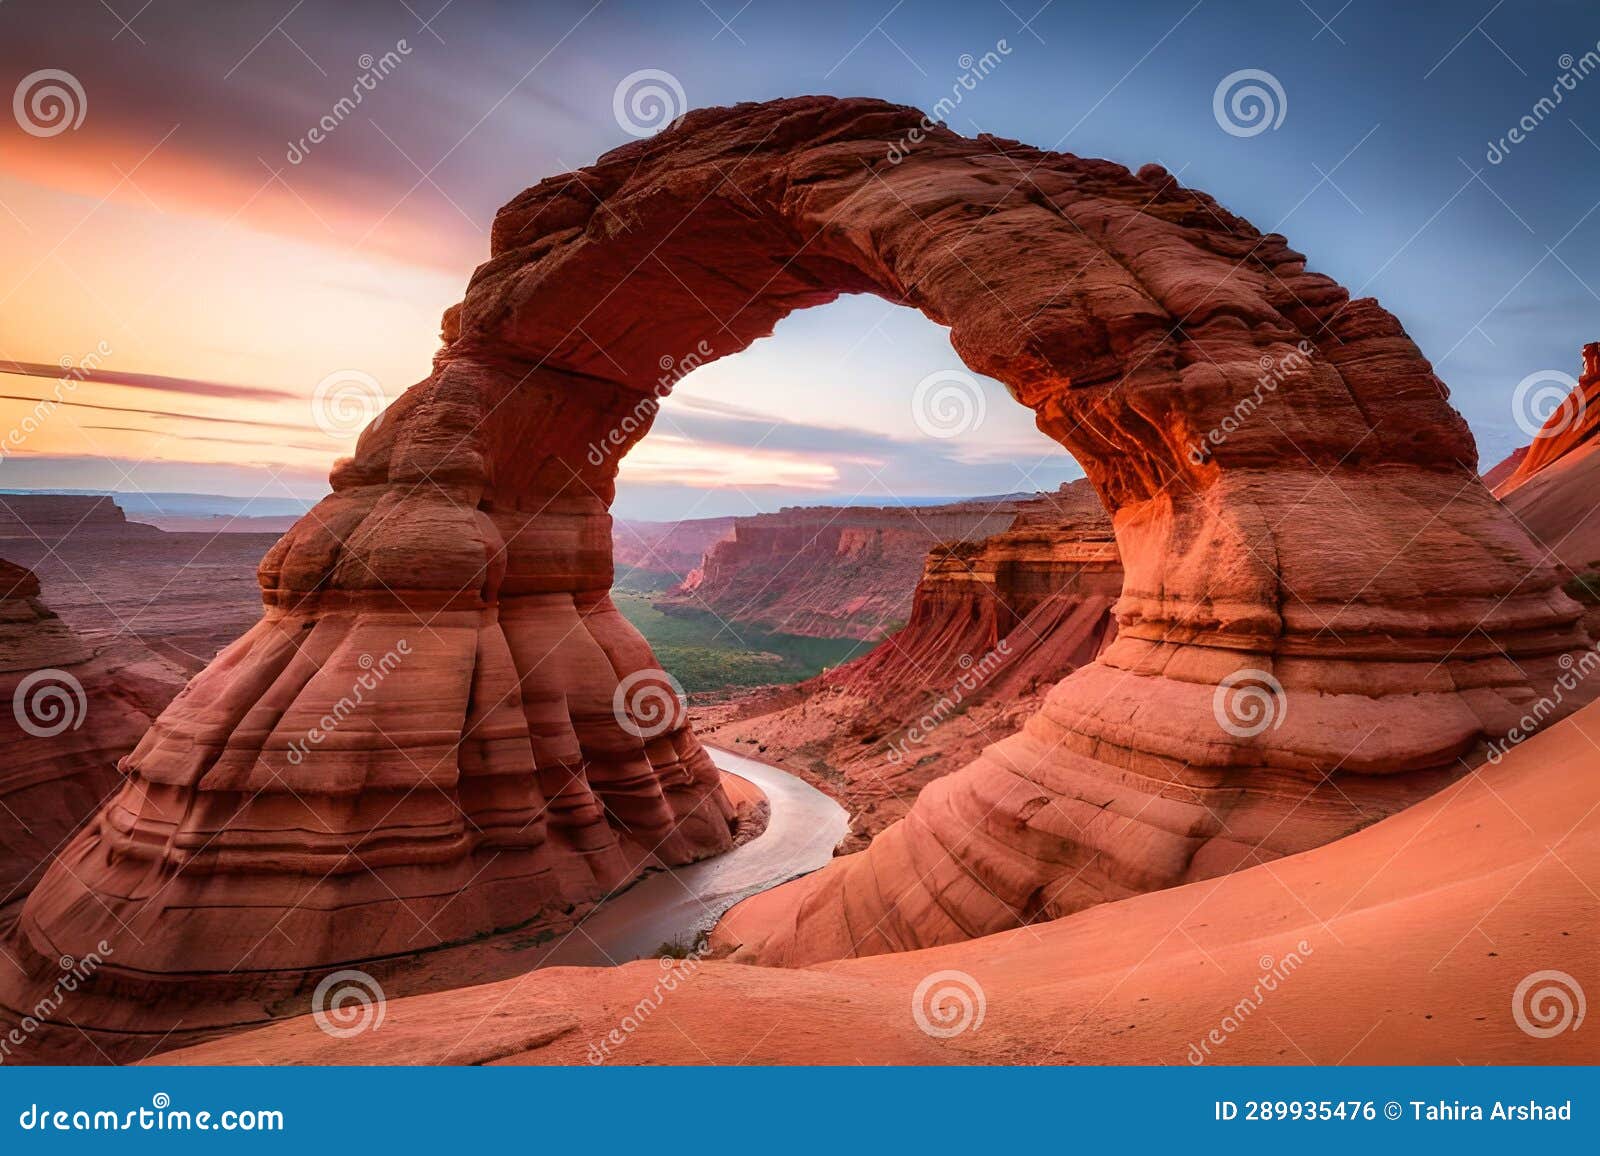 natural picturesque erosive arch in hills from red sandstone.